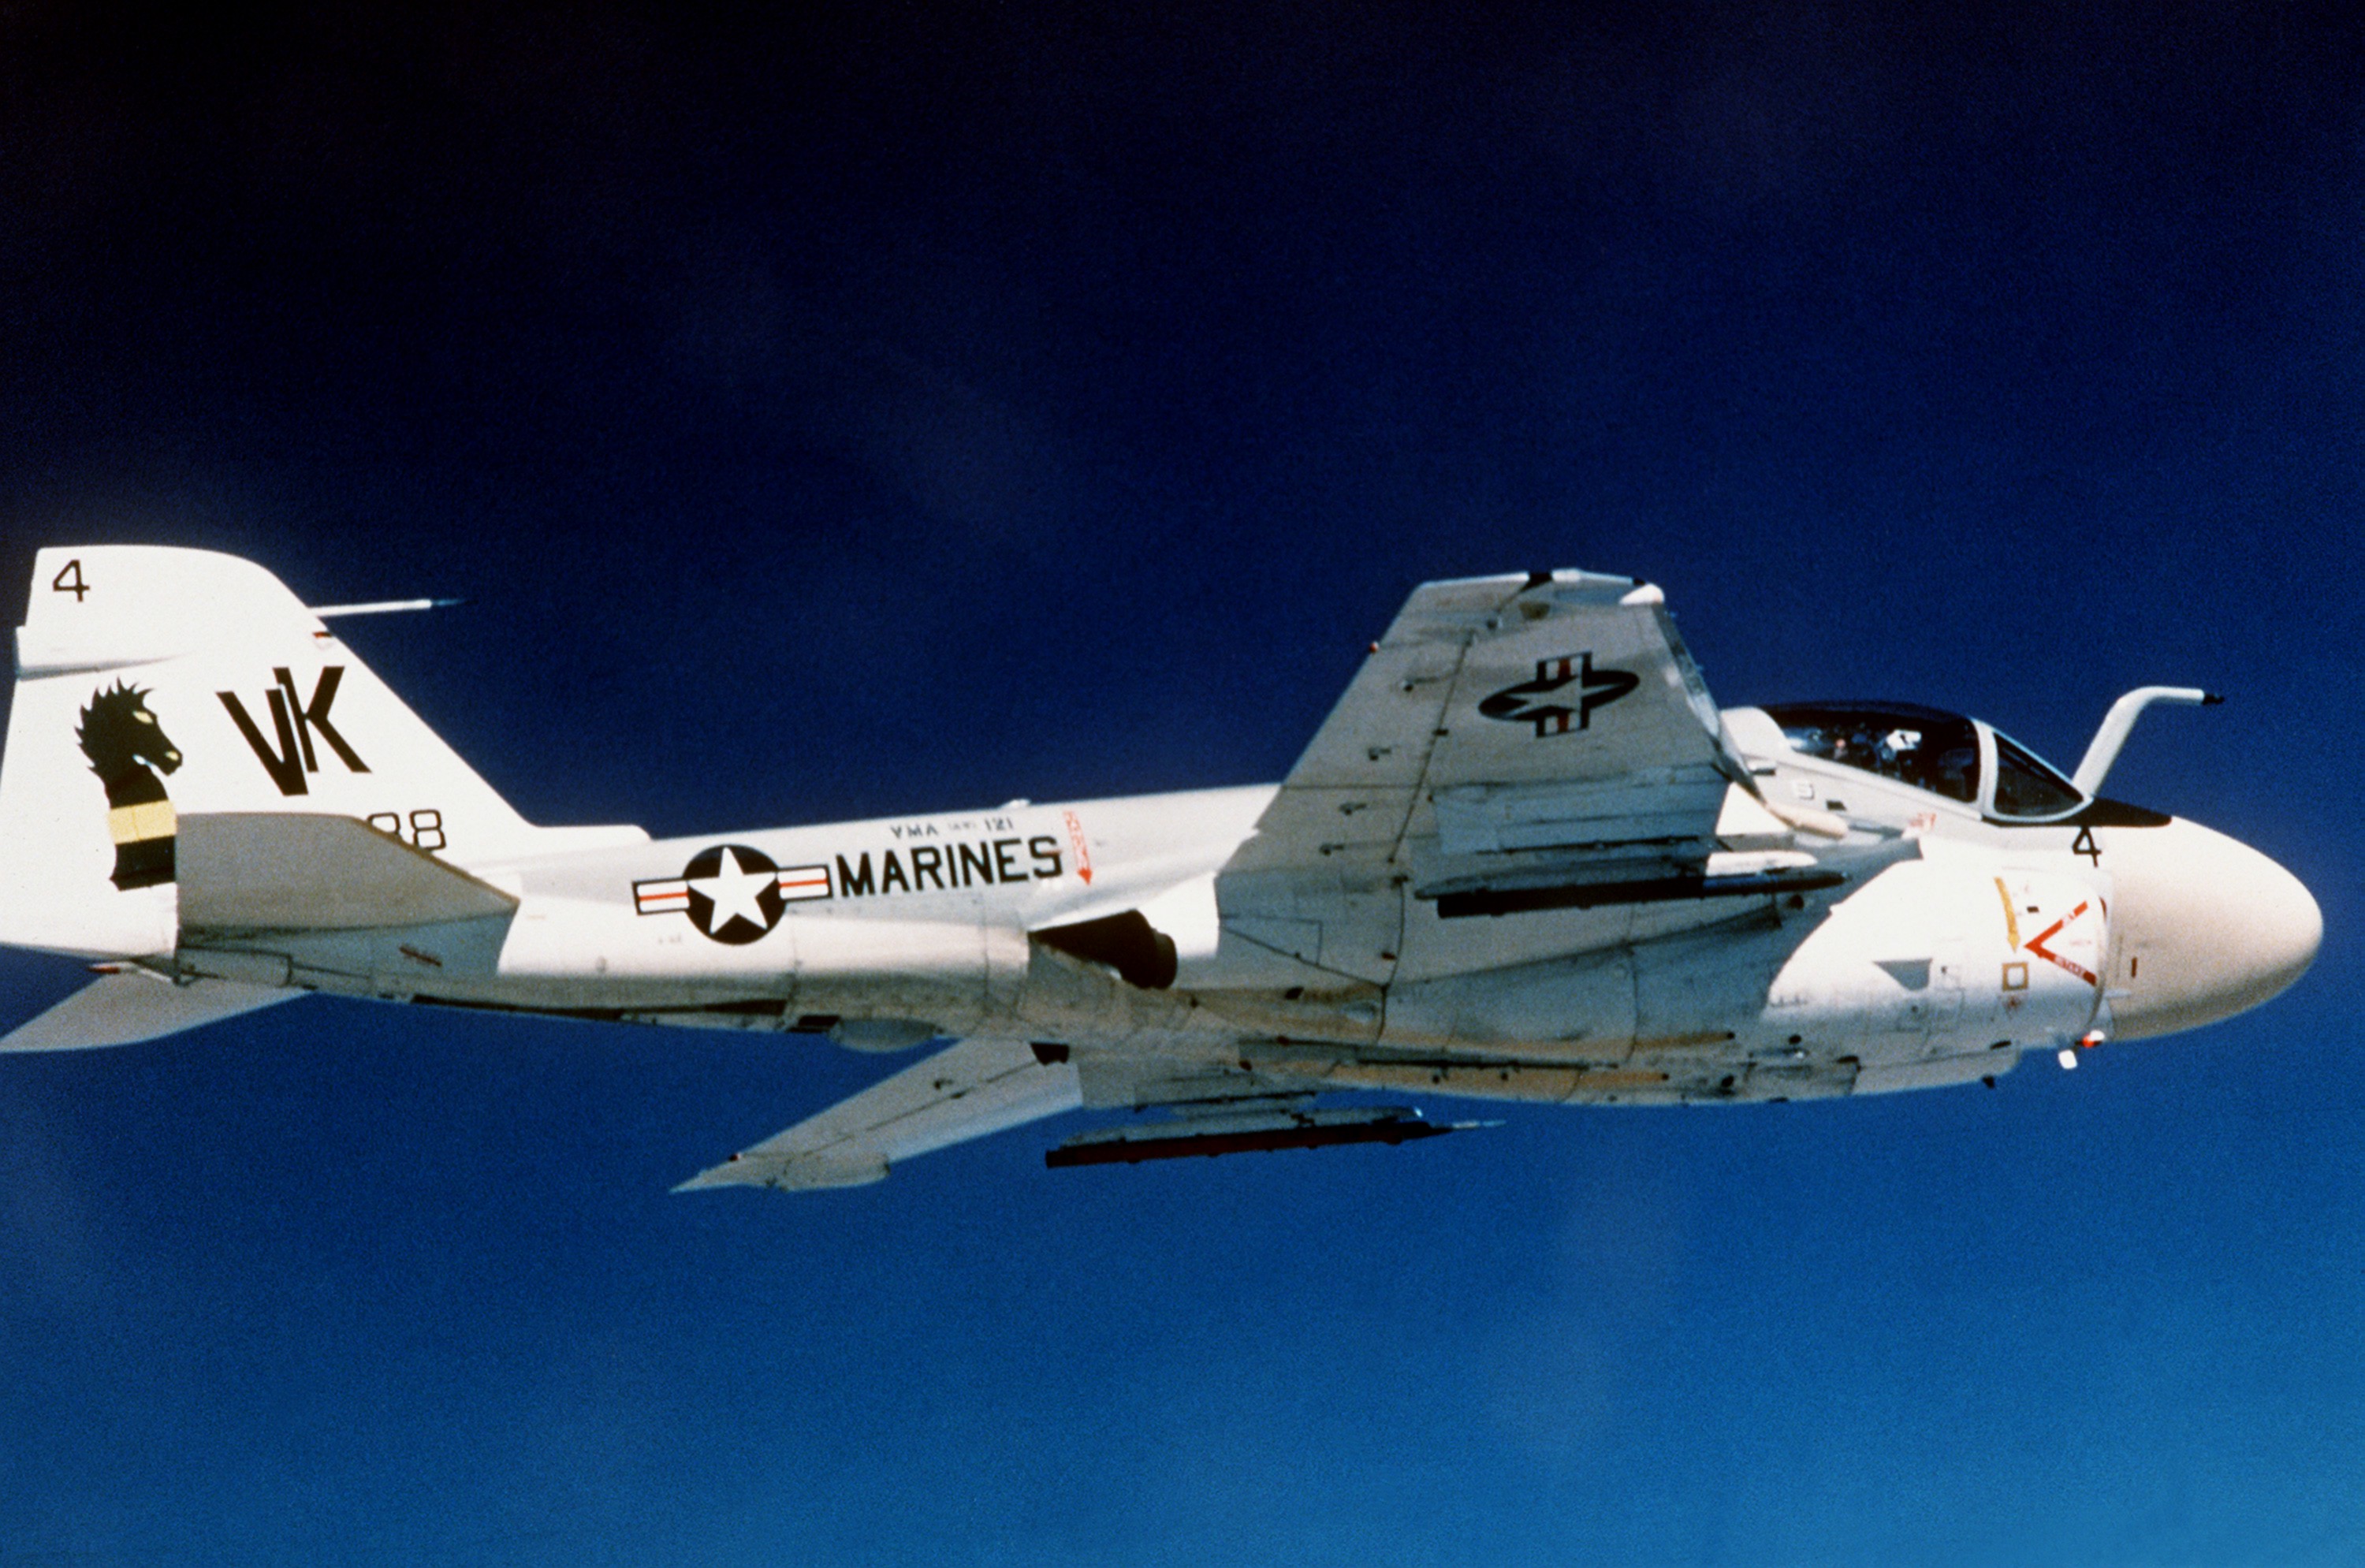 A-6E Intruder Departed from Marine Corps Service